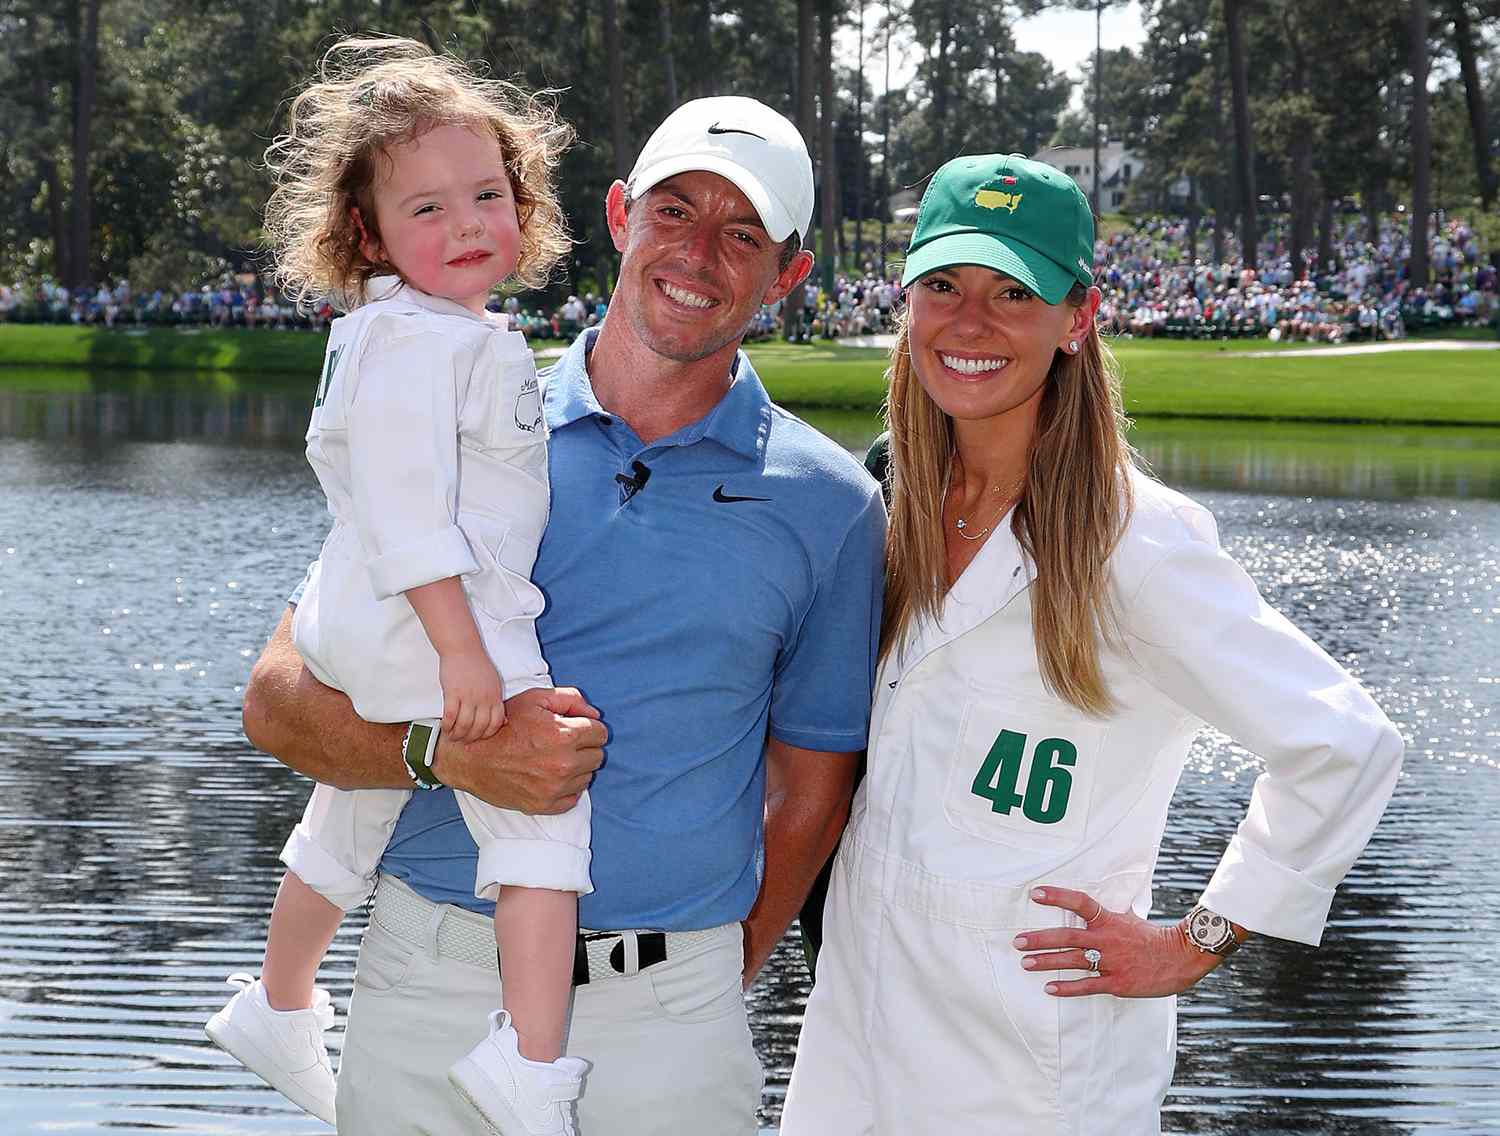 Rory McIlroy of Northern Ireland poses for a photo with his wife, Erica Stoll and daughter Poppy McIlroy during the Par 3 contest prior to the 2023 Masters Tournament at Augusta National Golf Club